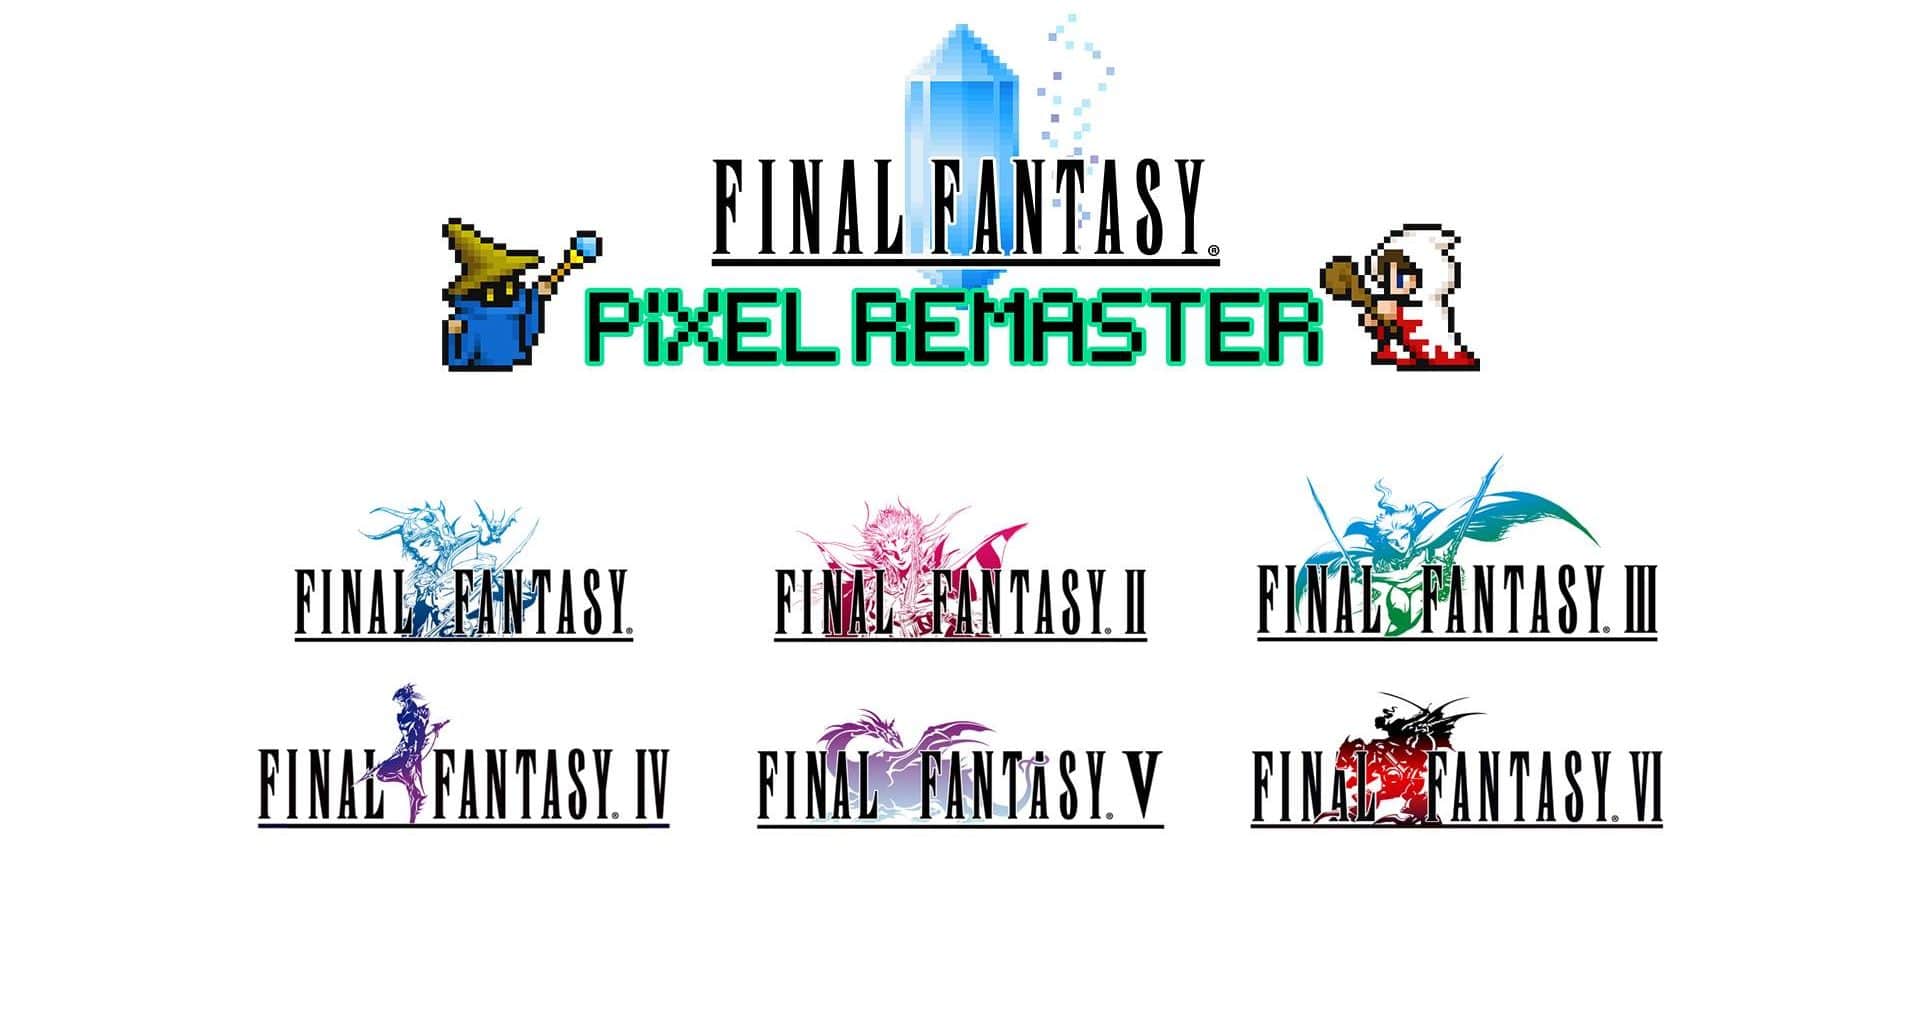 Final Fantasy Pixel Remaster Announced for PS4 and Nintendo Switch 1